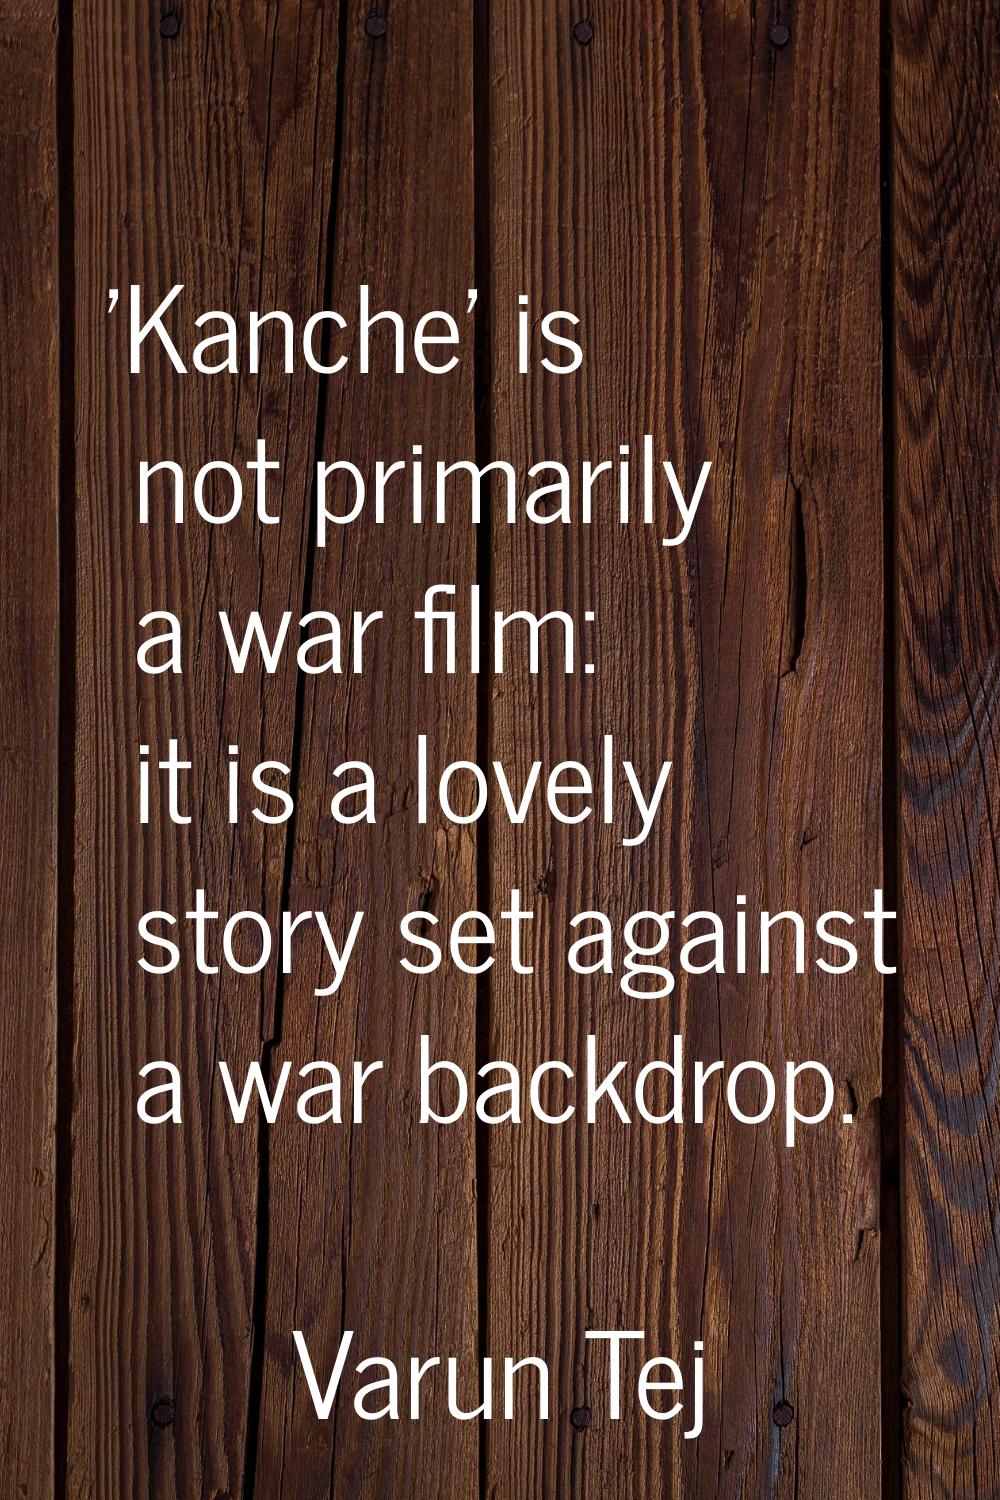 'Kanche' is not primarily a war film: it is a lovely story set against a war backdrop.